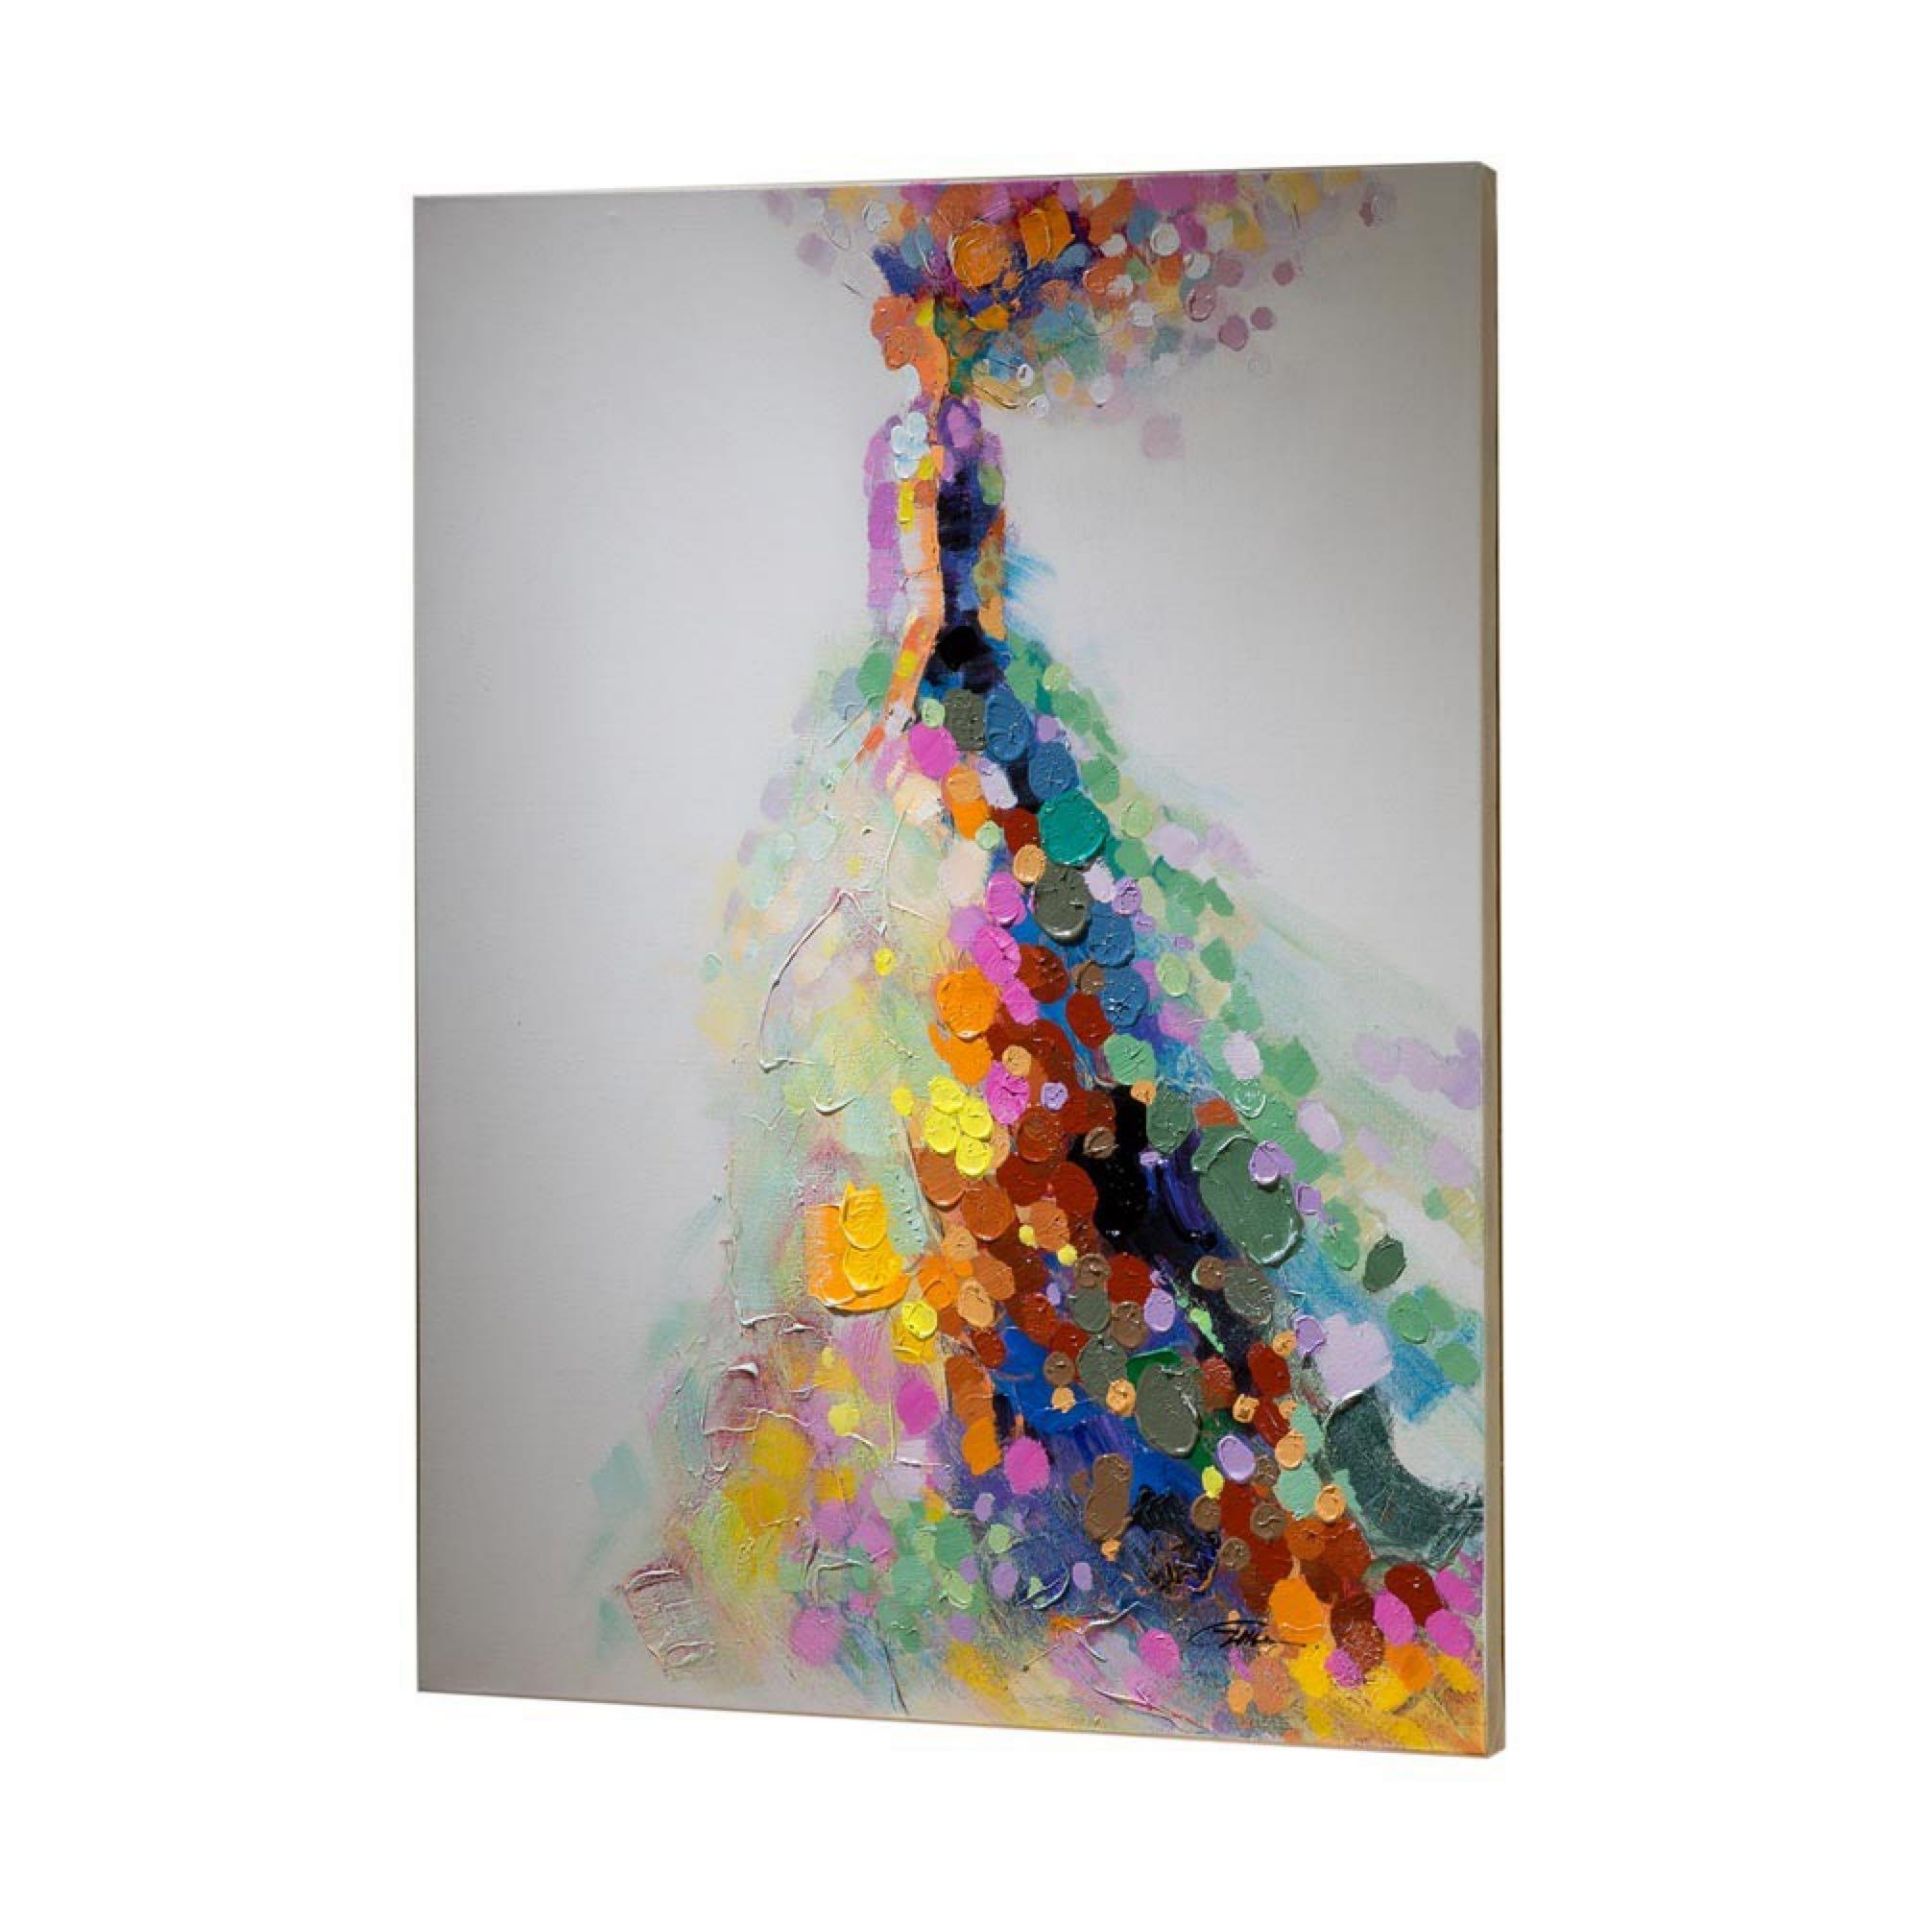 RRP £180 Visionary "Gala" Acrylic Paint On Stretched Canvas Inspirational Wall Art Piece By Schuller